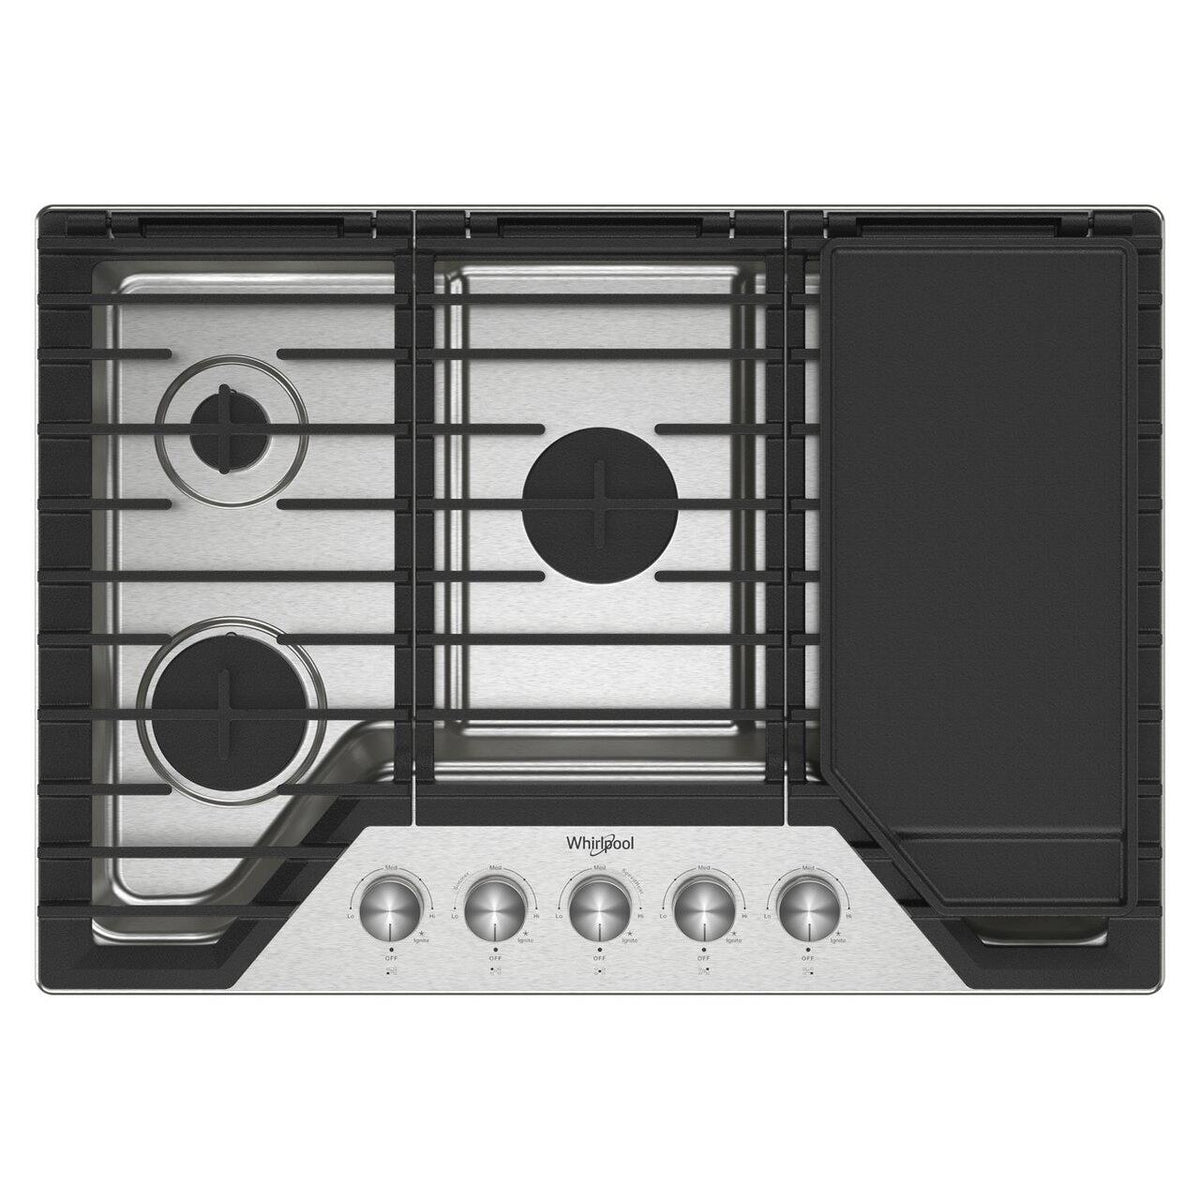 30-inch Built-in Gas Cooktop with 2-in-1 Hinged Grate to Griddle WCGK7530PS IMAGE 1